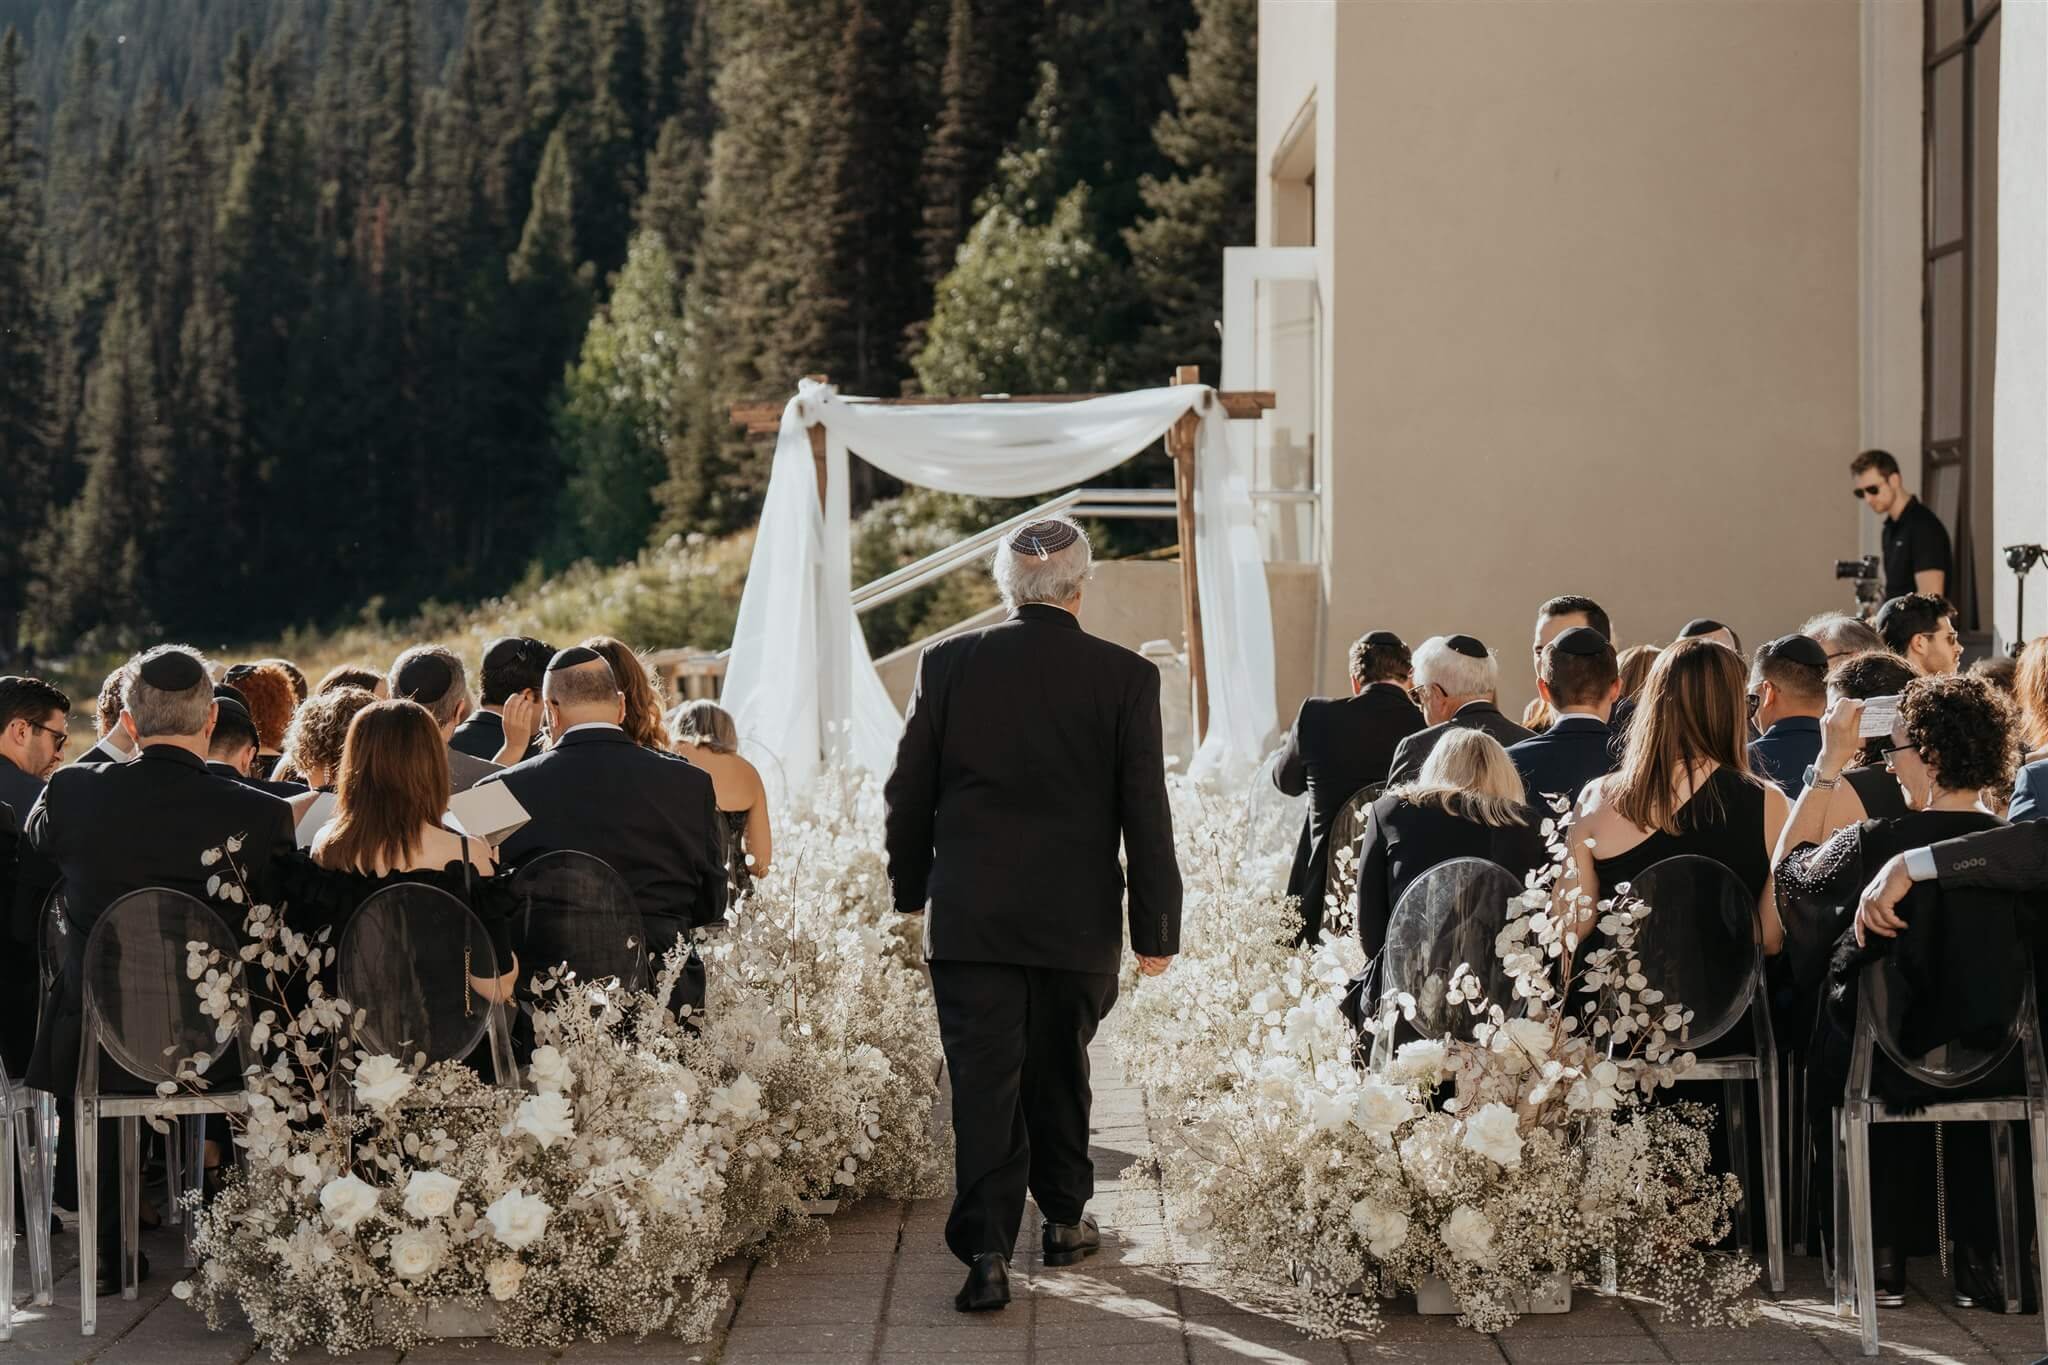 Outdoor wedding ceremony setup with white and gold wedding decorations